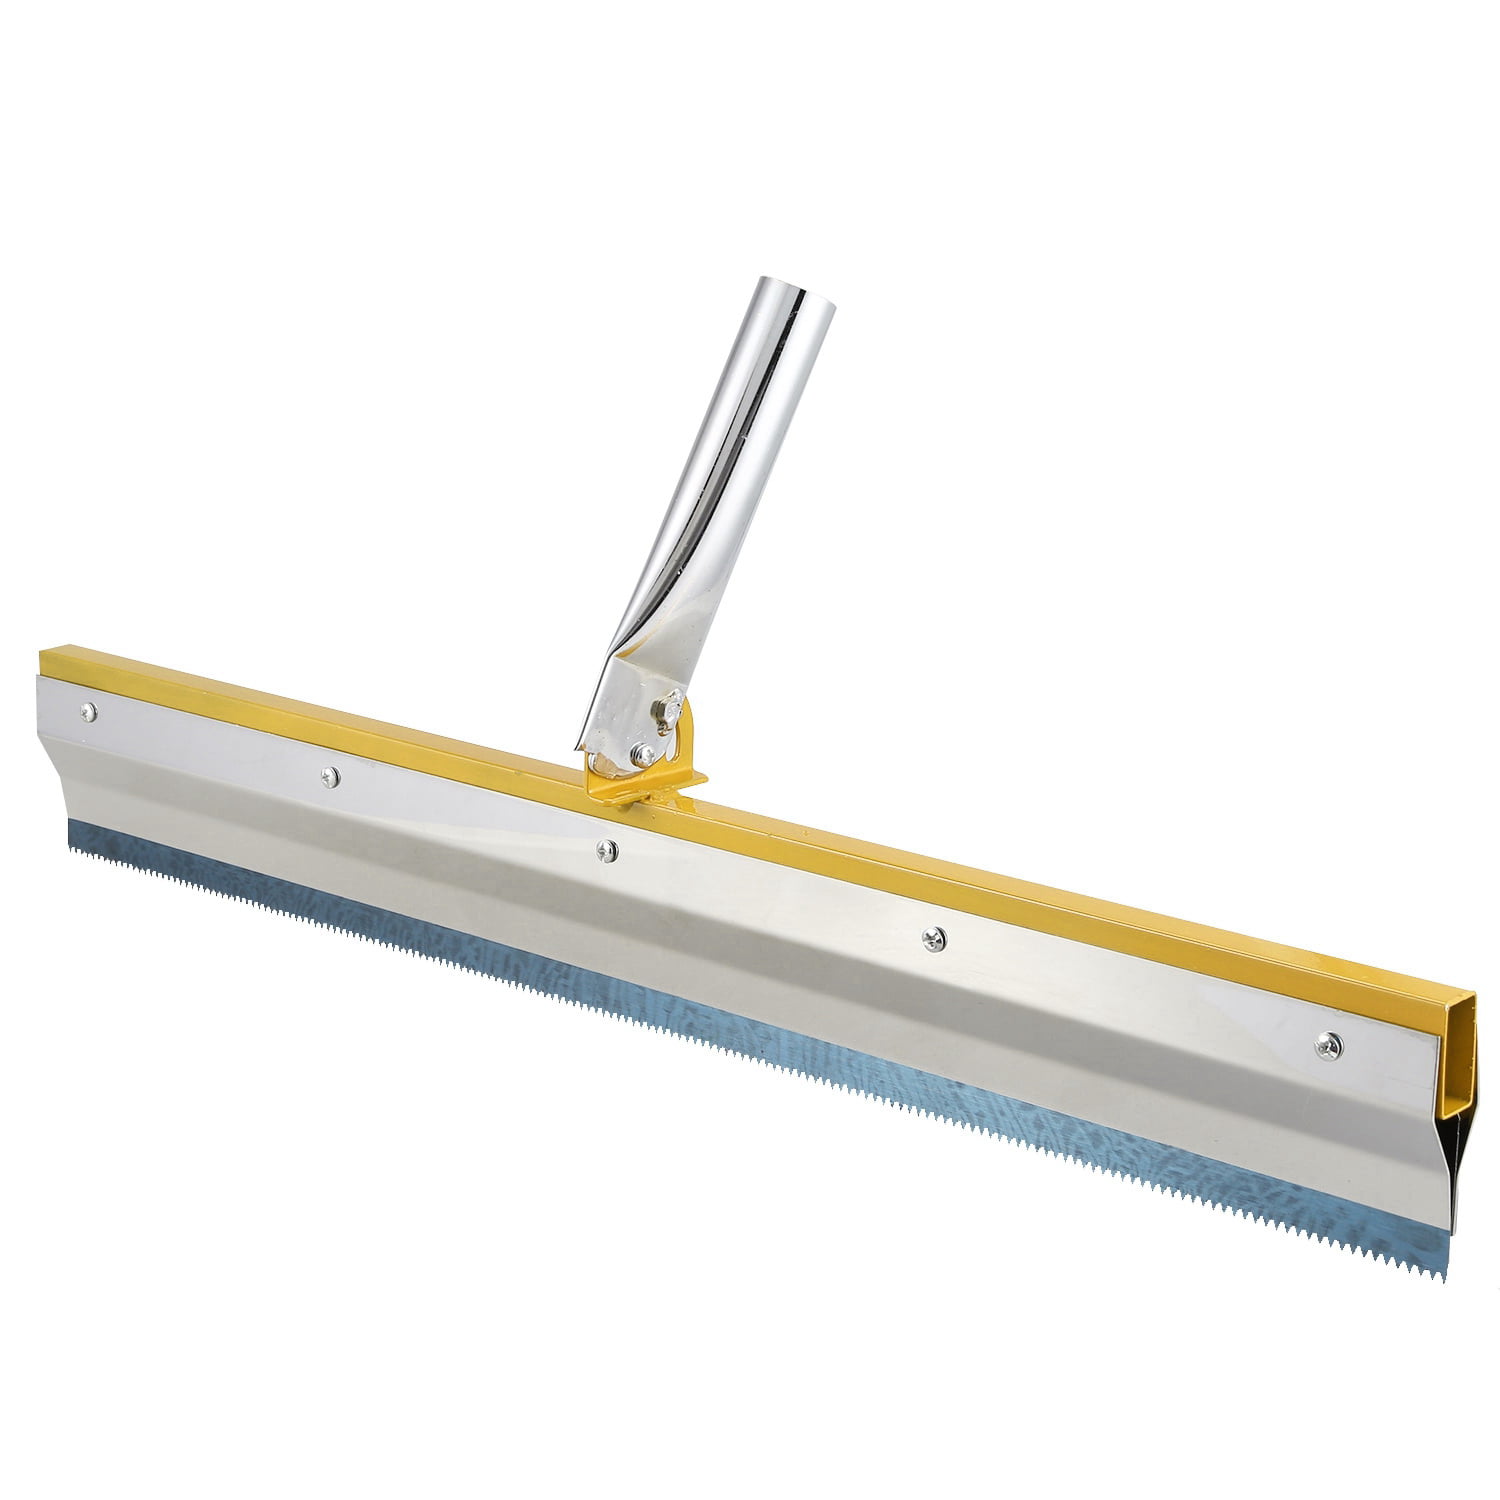 DUPOL - Epoxy Floor Squeegees - Notched Squeegee 16” are Used to Apply  Heavy coatings Such as epoxy, Urethane, Cement Self-Leveling. The Best  Serrated